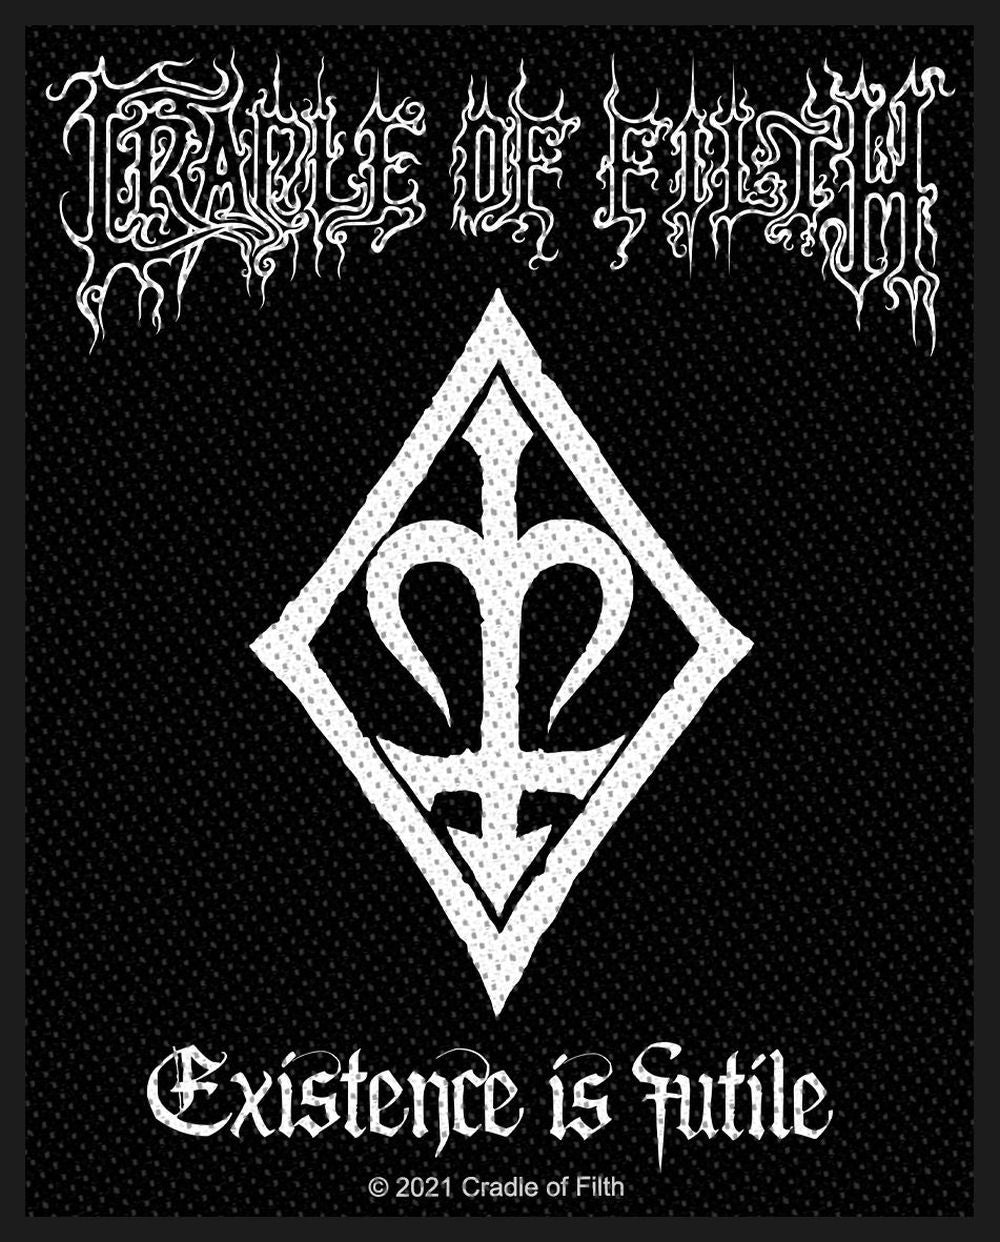 Cradle Of Filth - Existence Is Futile (100mm x 80mm) Sew-On Patch